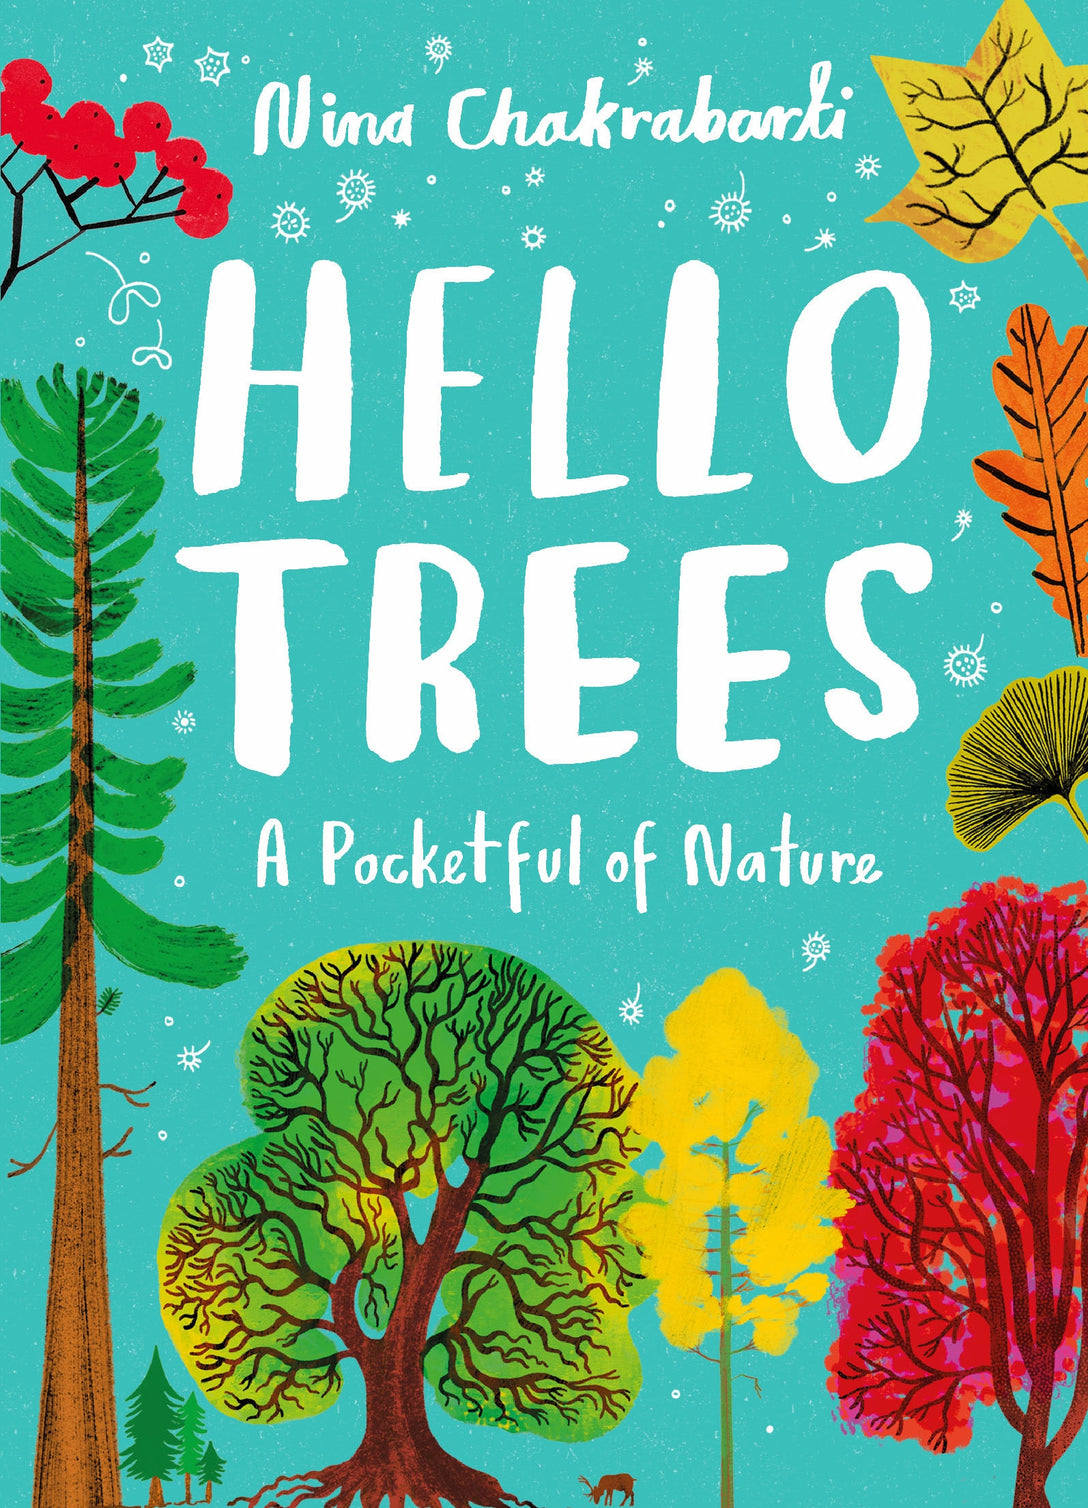 Little Guides to Nature: Hello Trees by Nina Chakrabarti